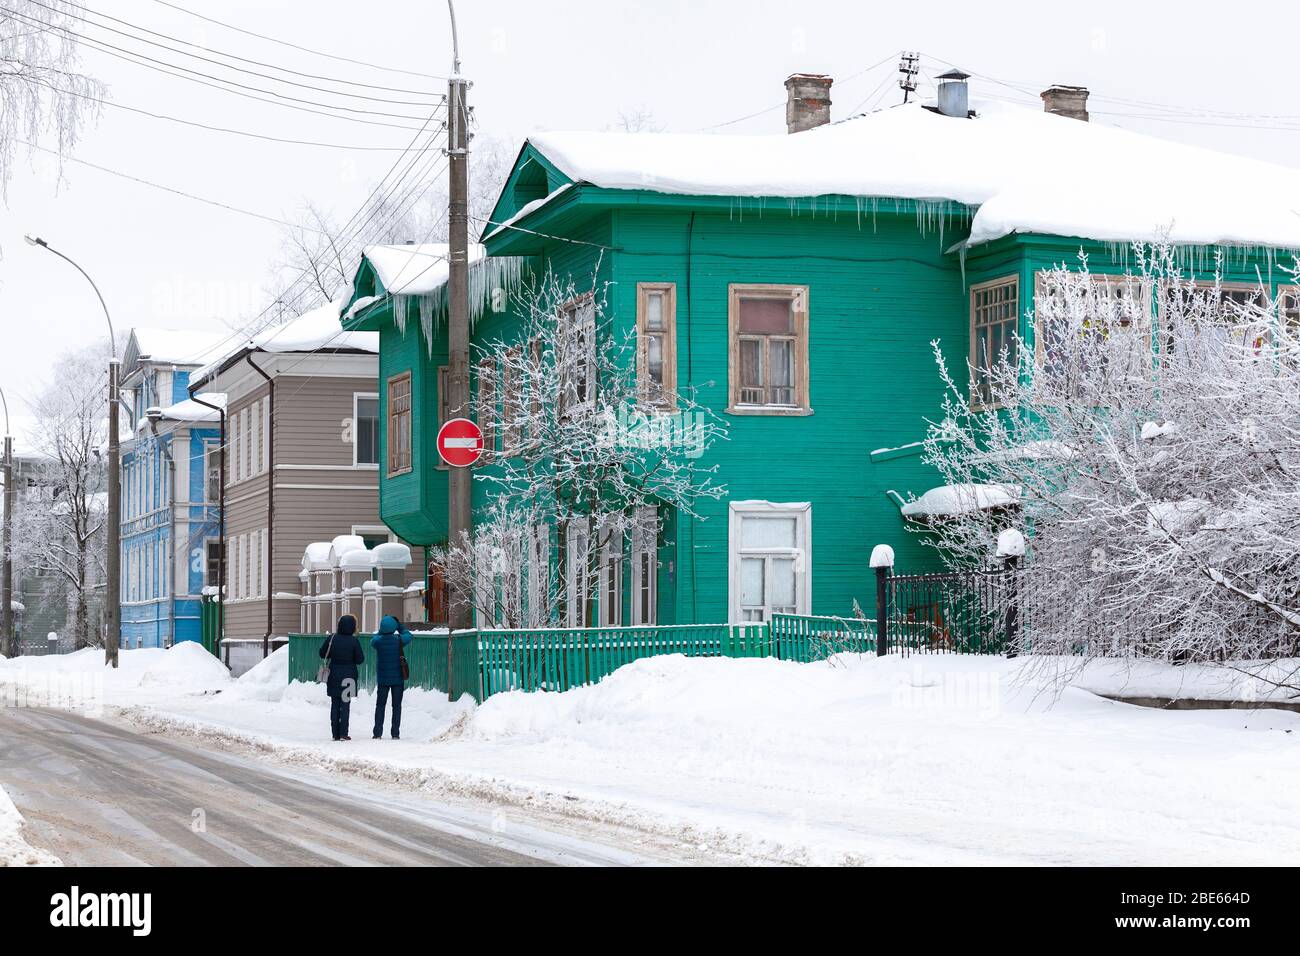 Vologda, Russia - February 3, 2019: Street view of Vologda at winter day, tourists take photos of old green wooden house Stock Photo